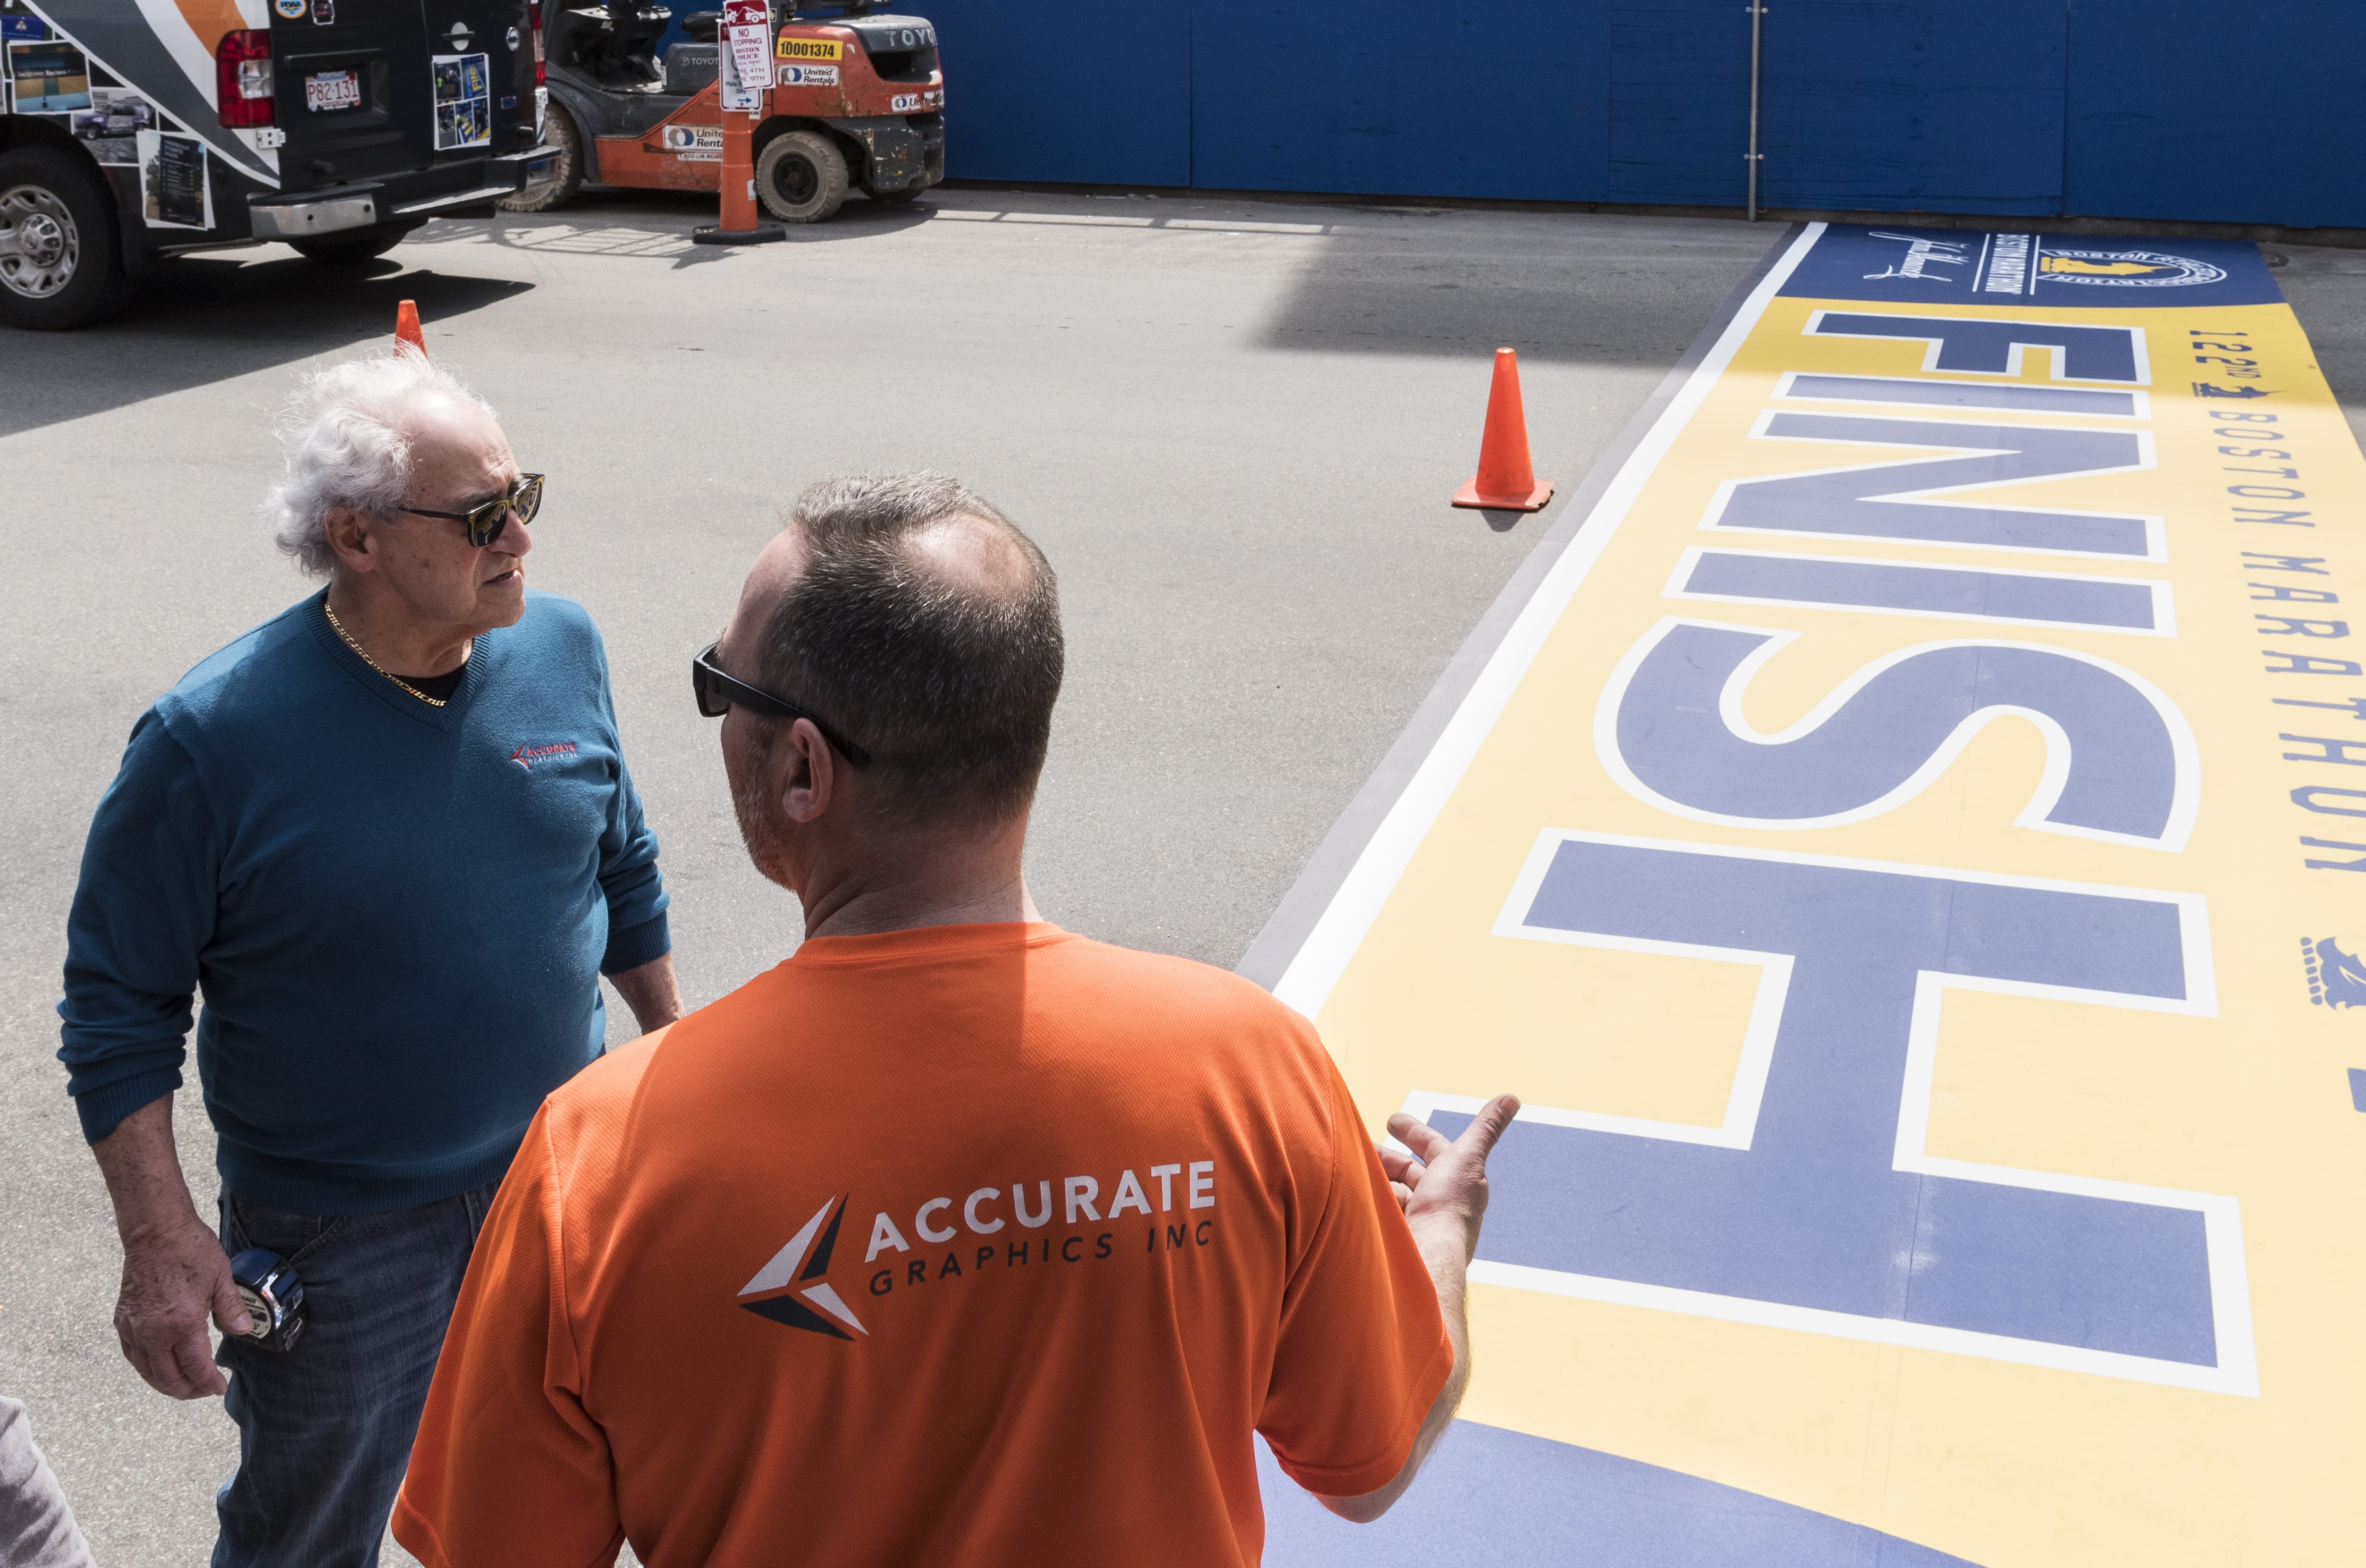 Accurate Graphic Inc. owner Peppy Bolognese, left, and employee Anthony Bisenti speak at the 122nd Boston Marathon finish line, having finished laying it out on Boylston Street in Boston on Thursday.